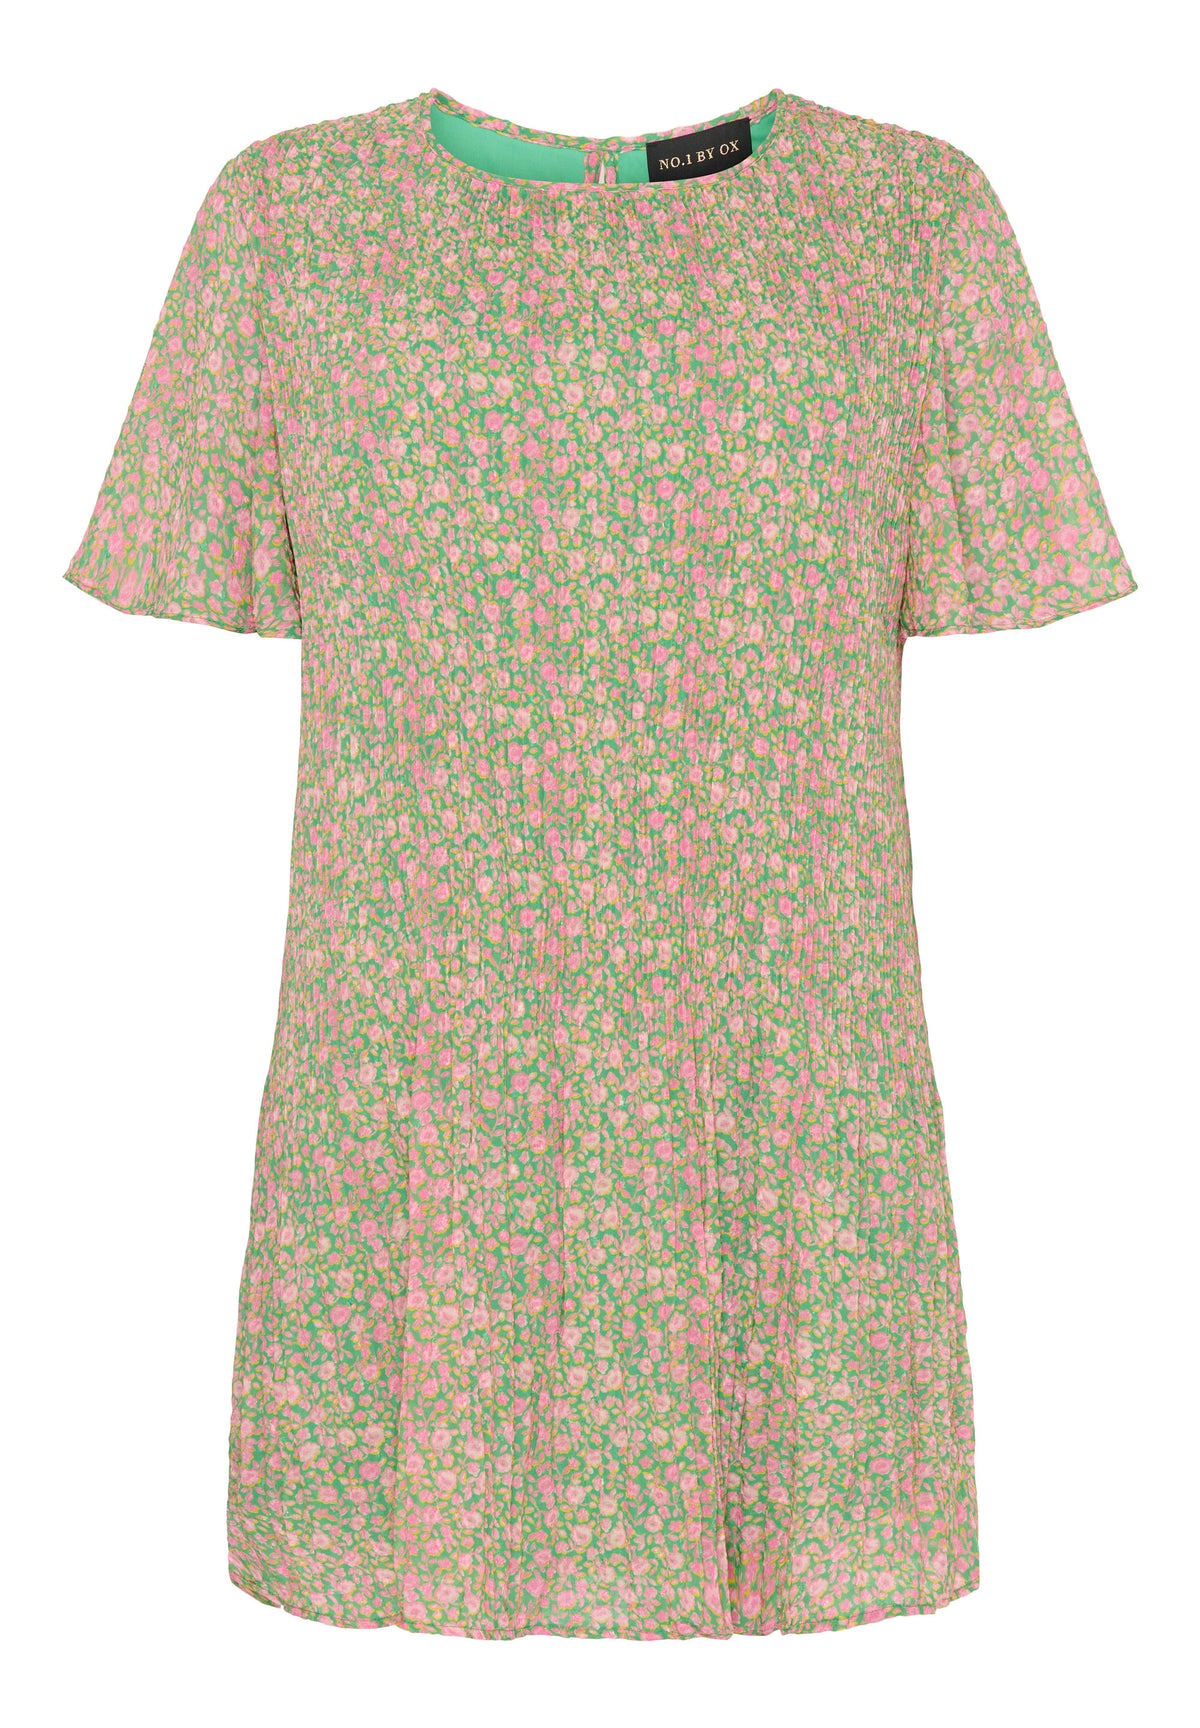 NO. 1 BY OX Pleated Dress w 1/2 flair sleeves Kjoler Spring Green w Rose Pink Flowers